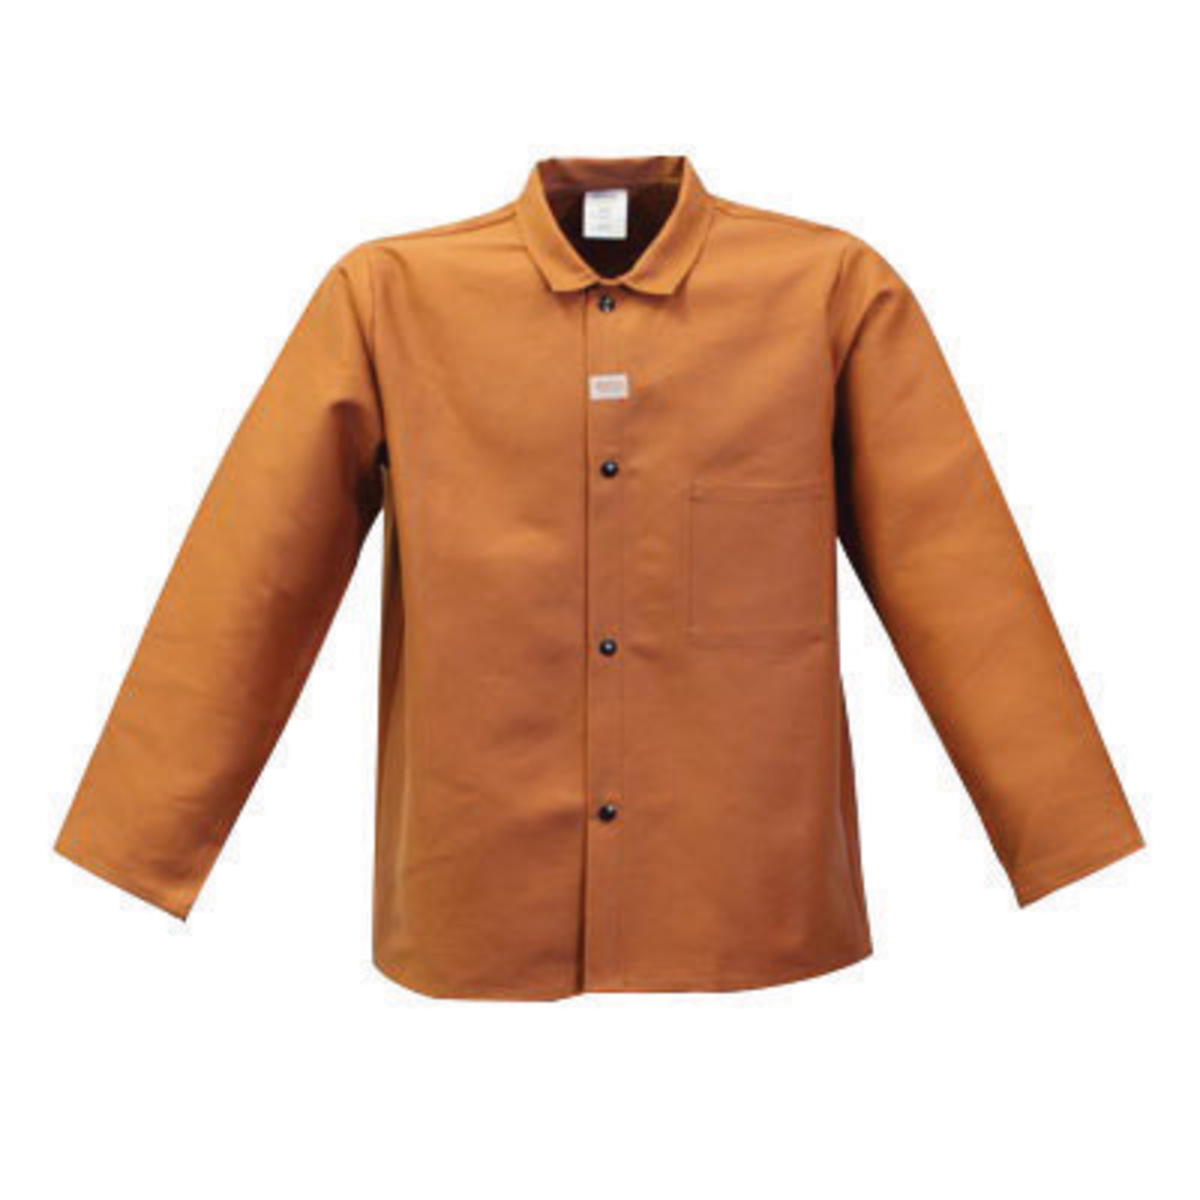 Stanco Safety Products™ Size 4X Rust Brown Cotton Flame Resistant Welding Jacket With Snap Closure